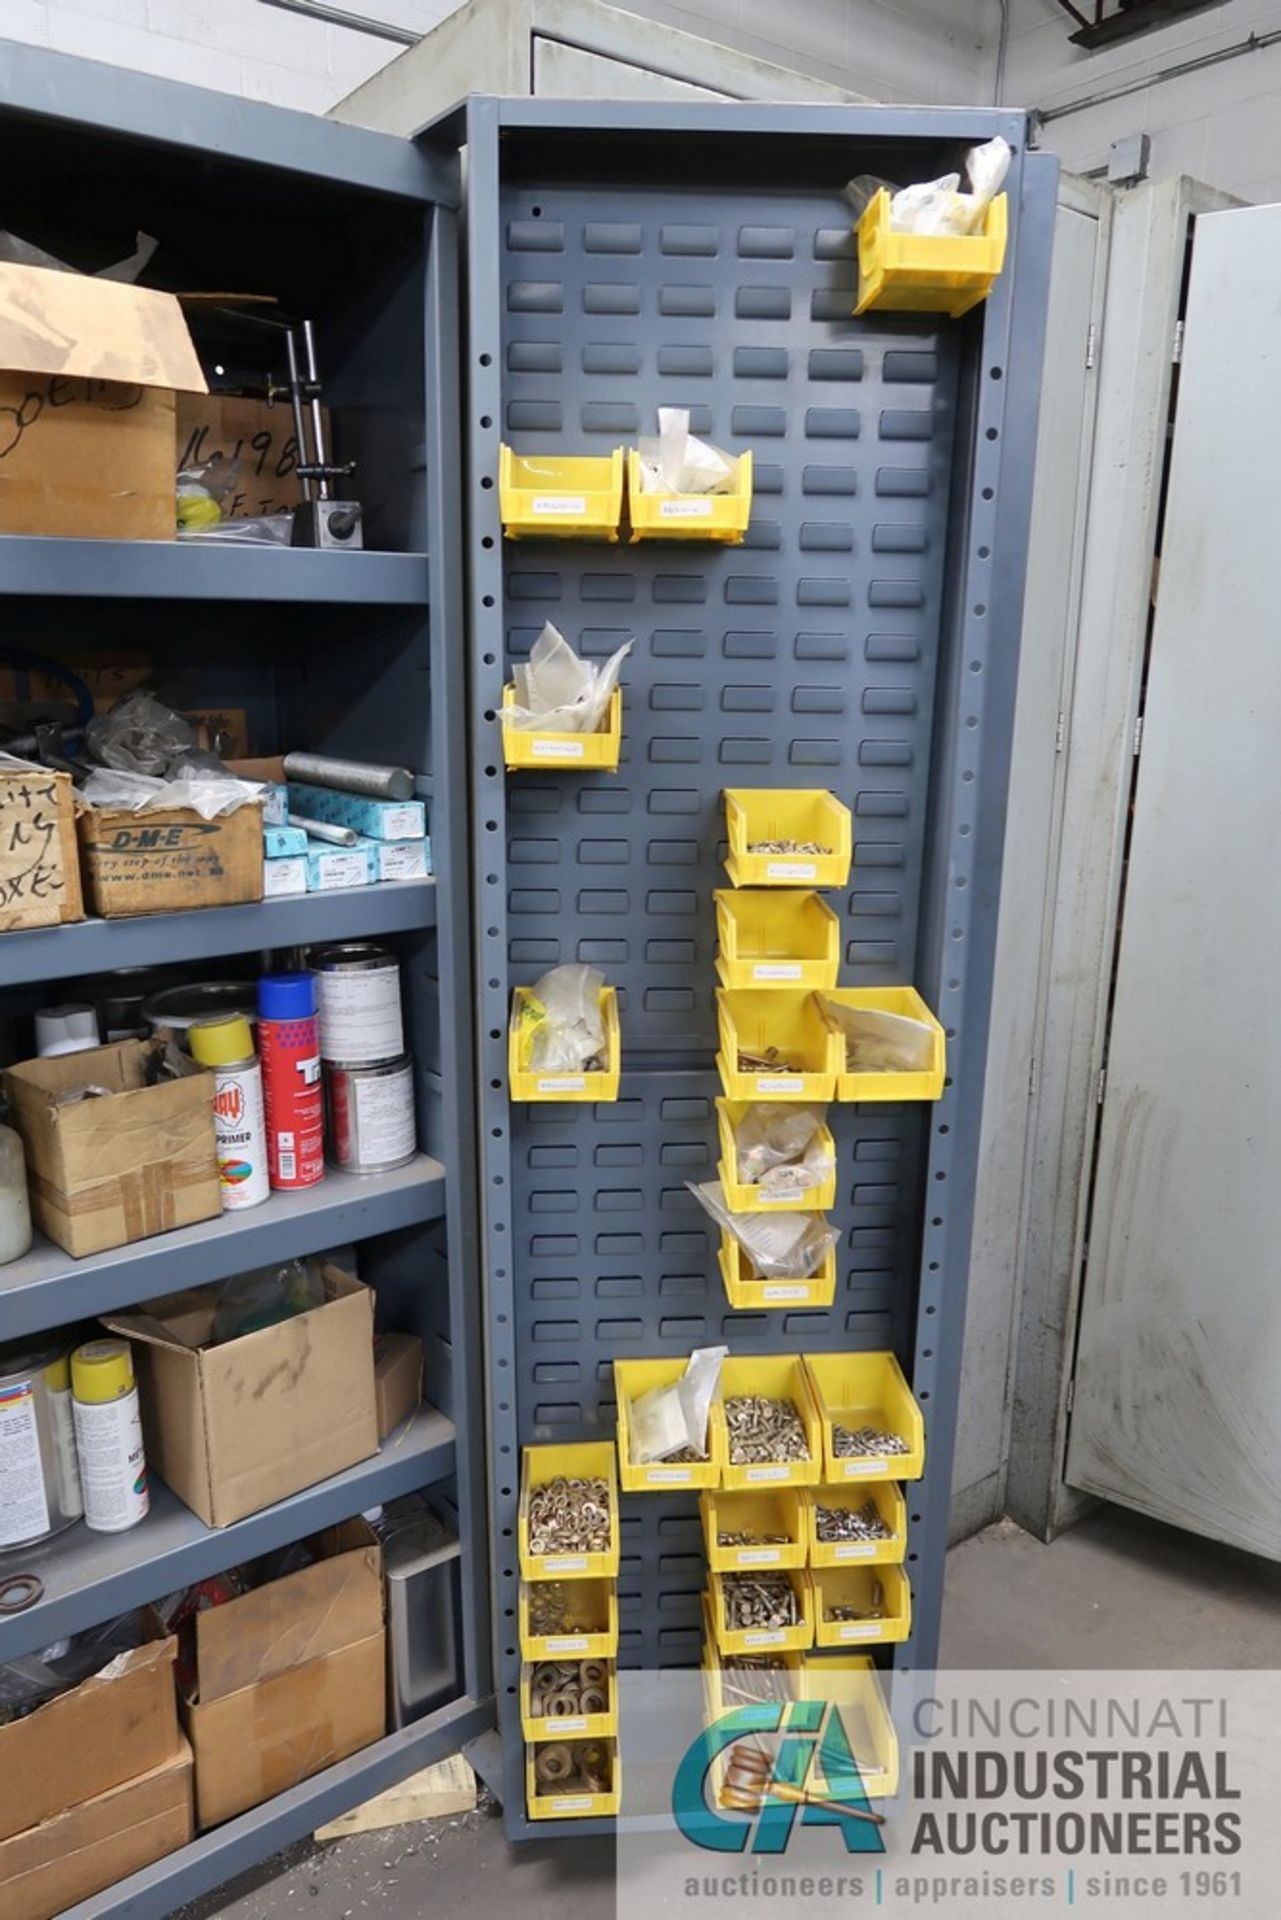 (LOT) MISCELLANEOUS SHOP SUPPLIES AND HARDWARE WITH HANGING BIN / MULTI SHELF STORAGE CABINET - Image 3 of 7